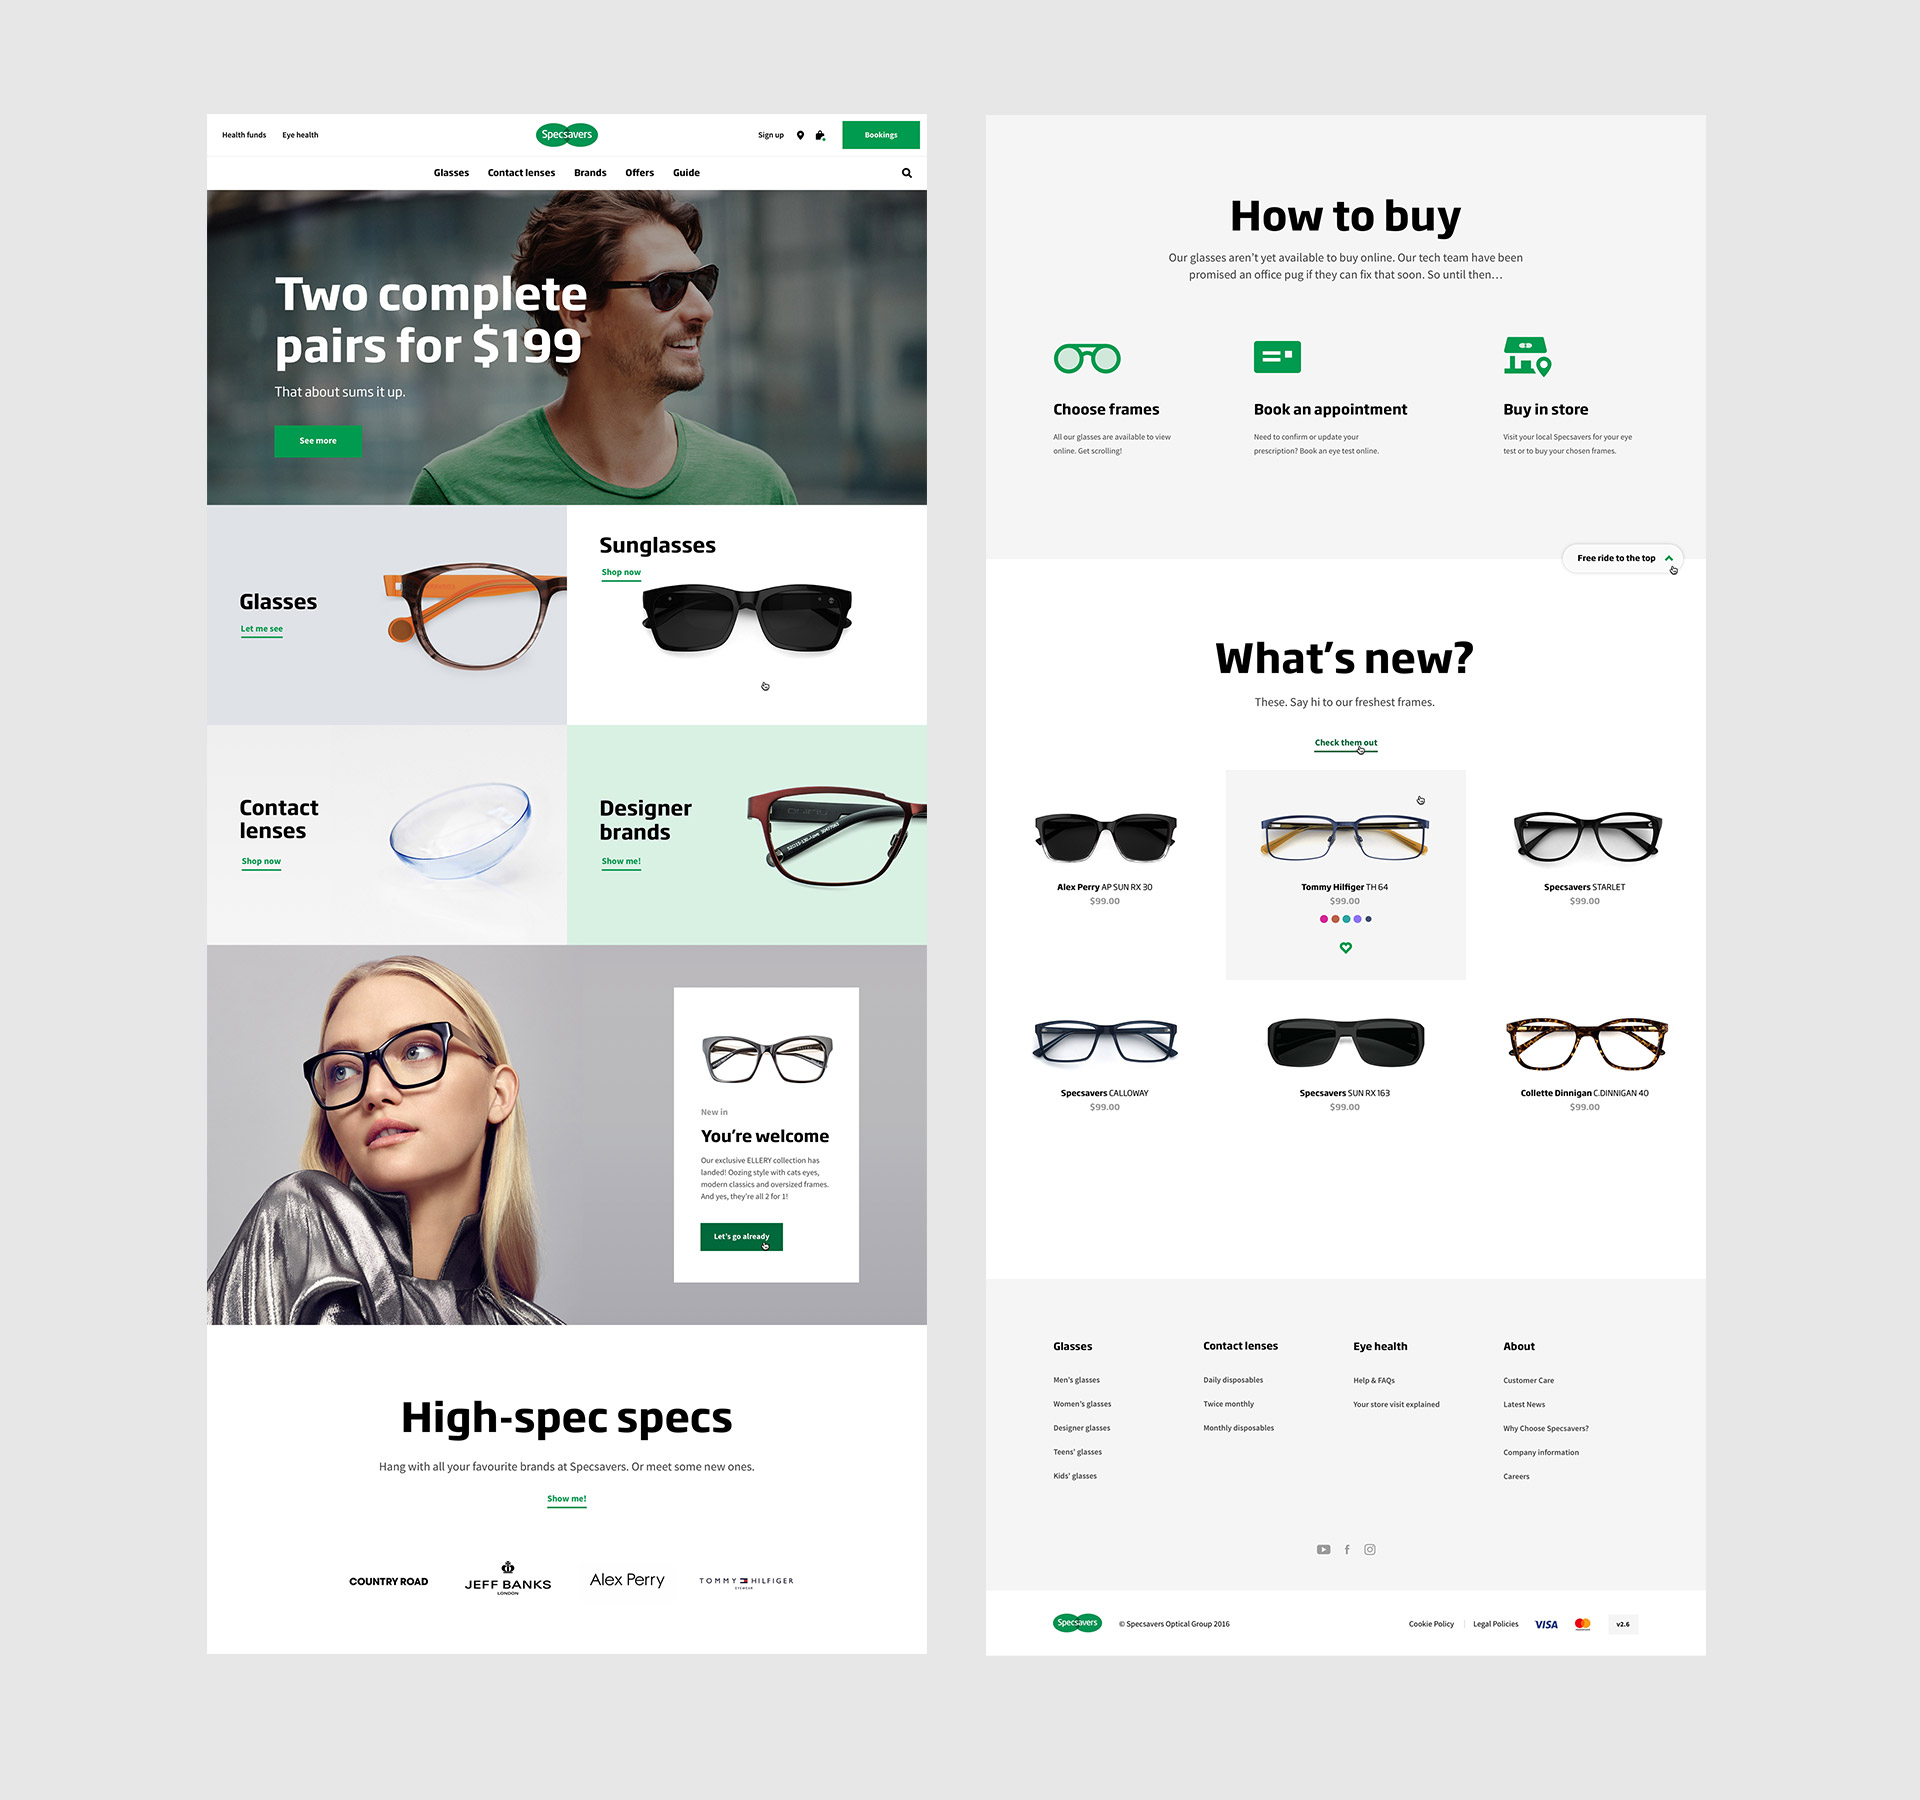 Specsavers-07-a-large